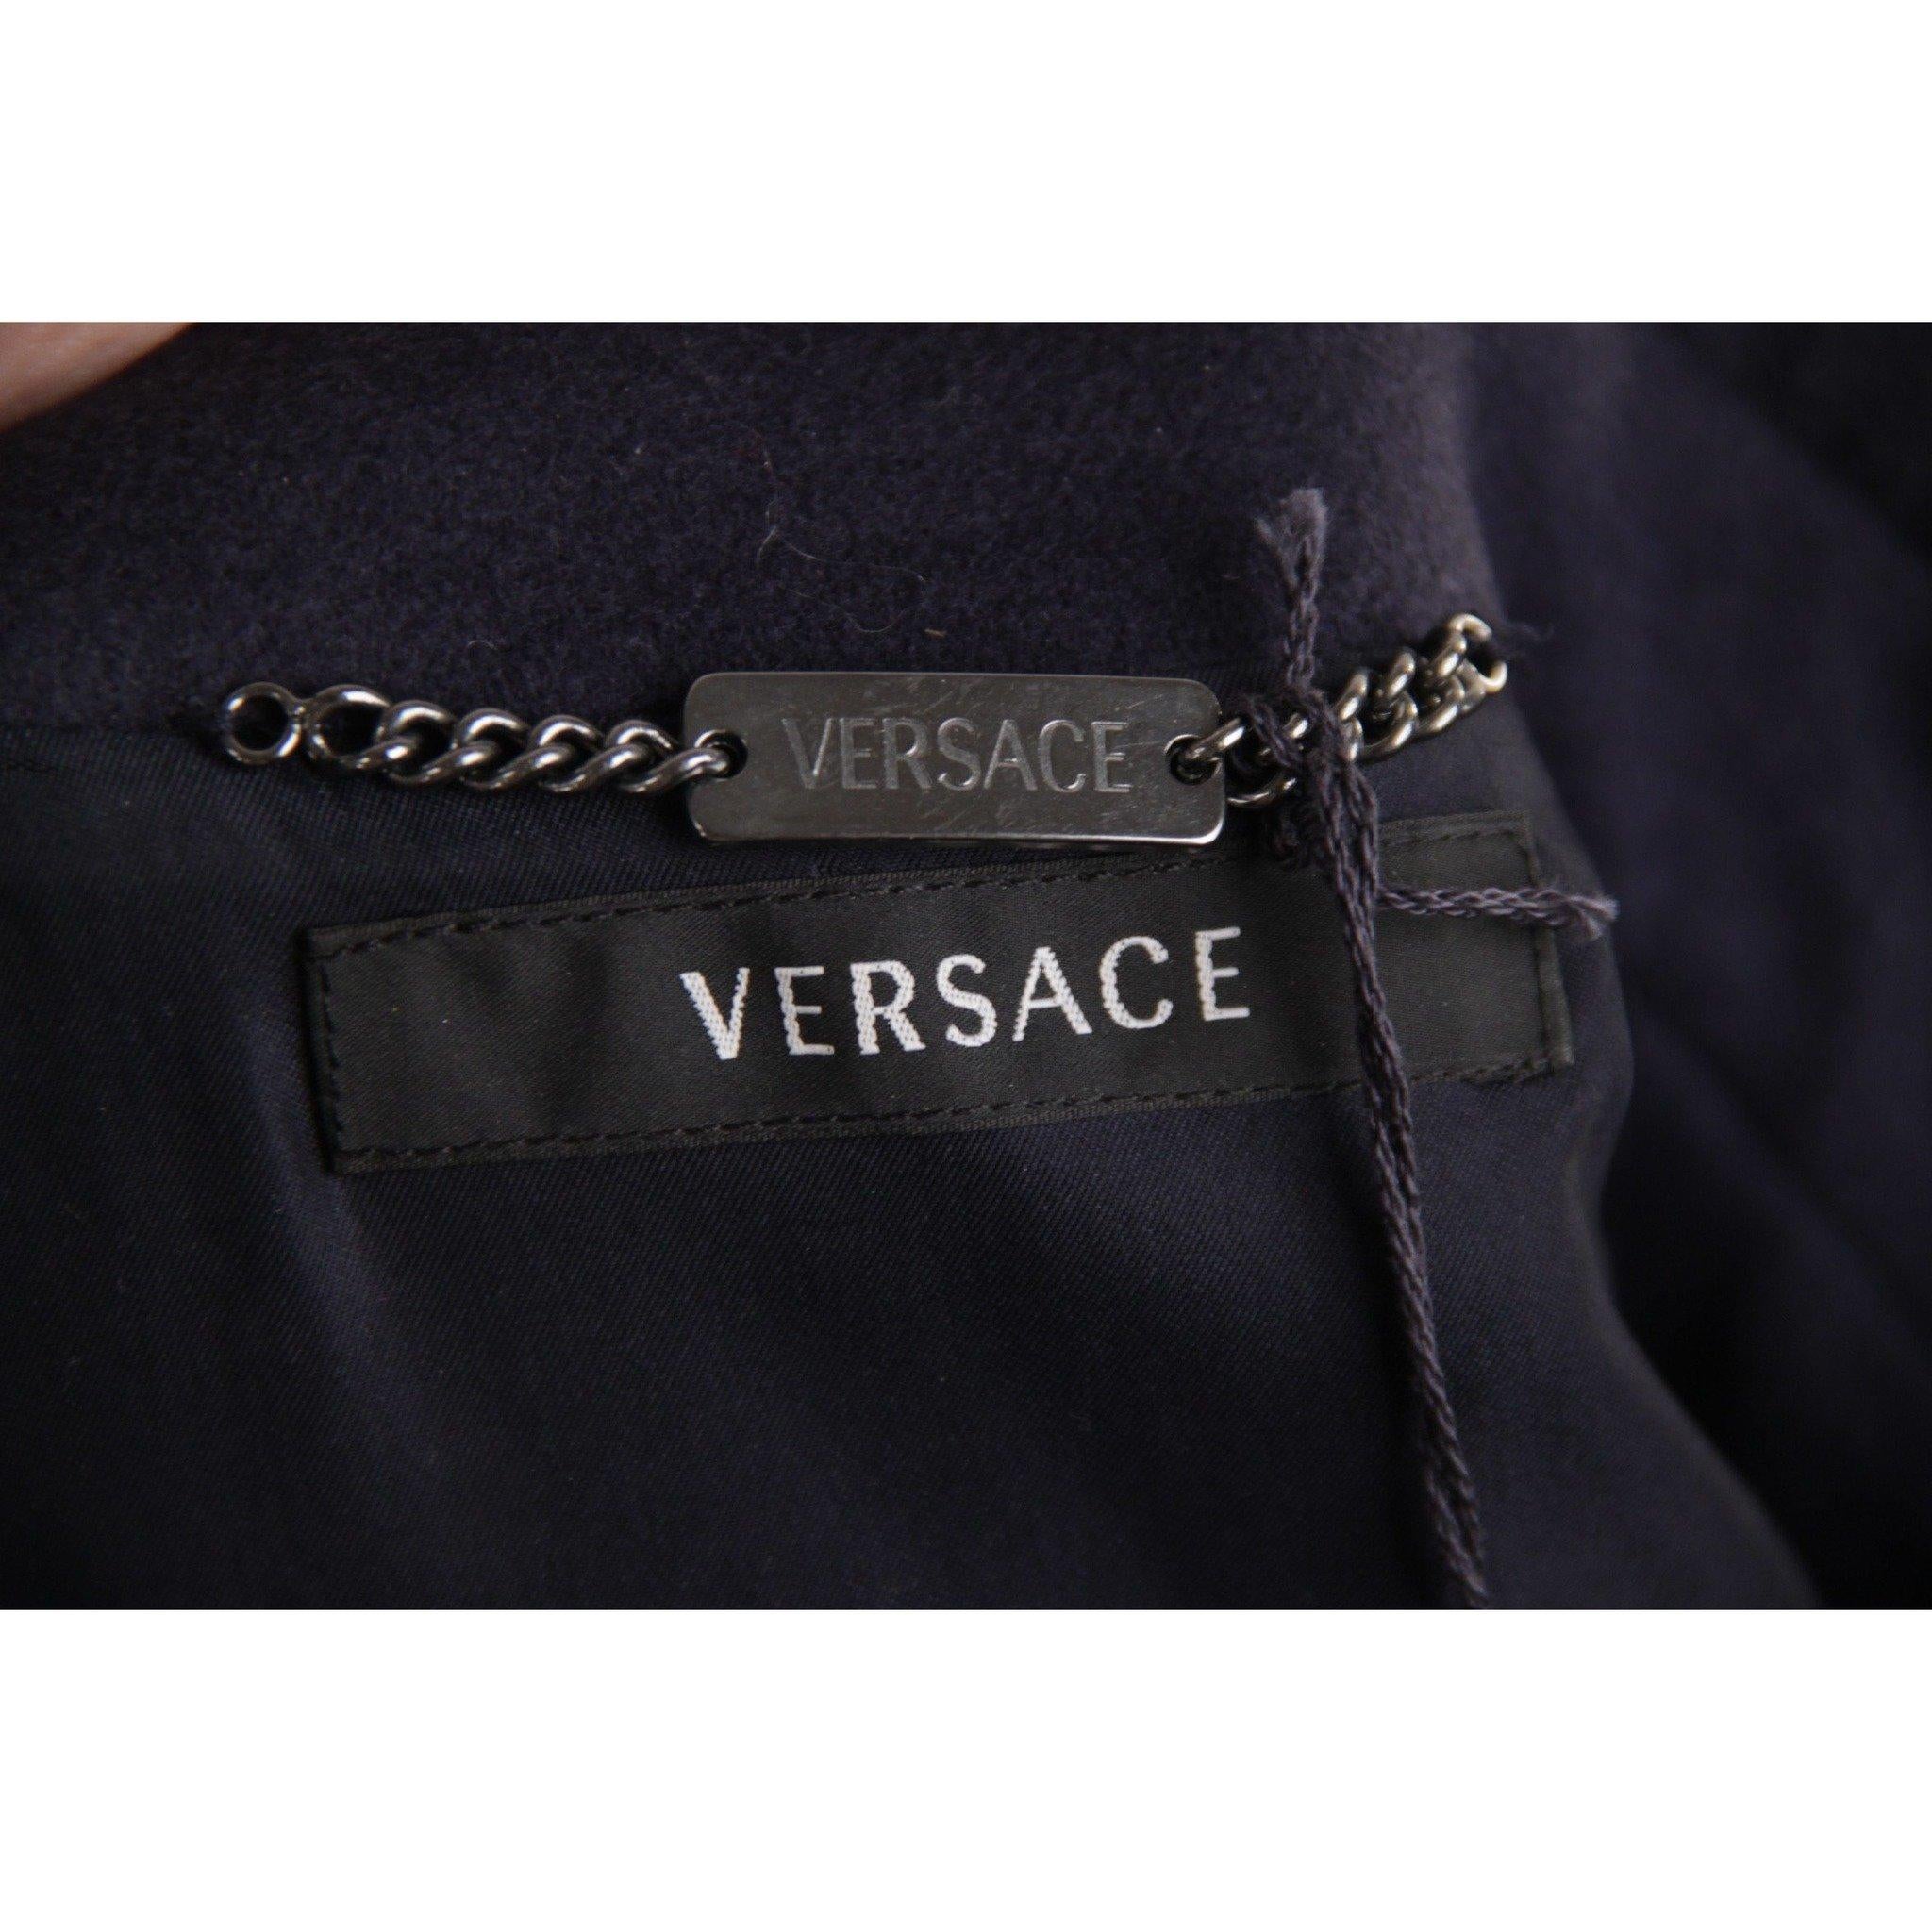 Versace Blue Wool Coat 2008 Fall Winter Collection Size 40 IT 2